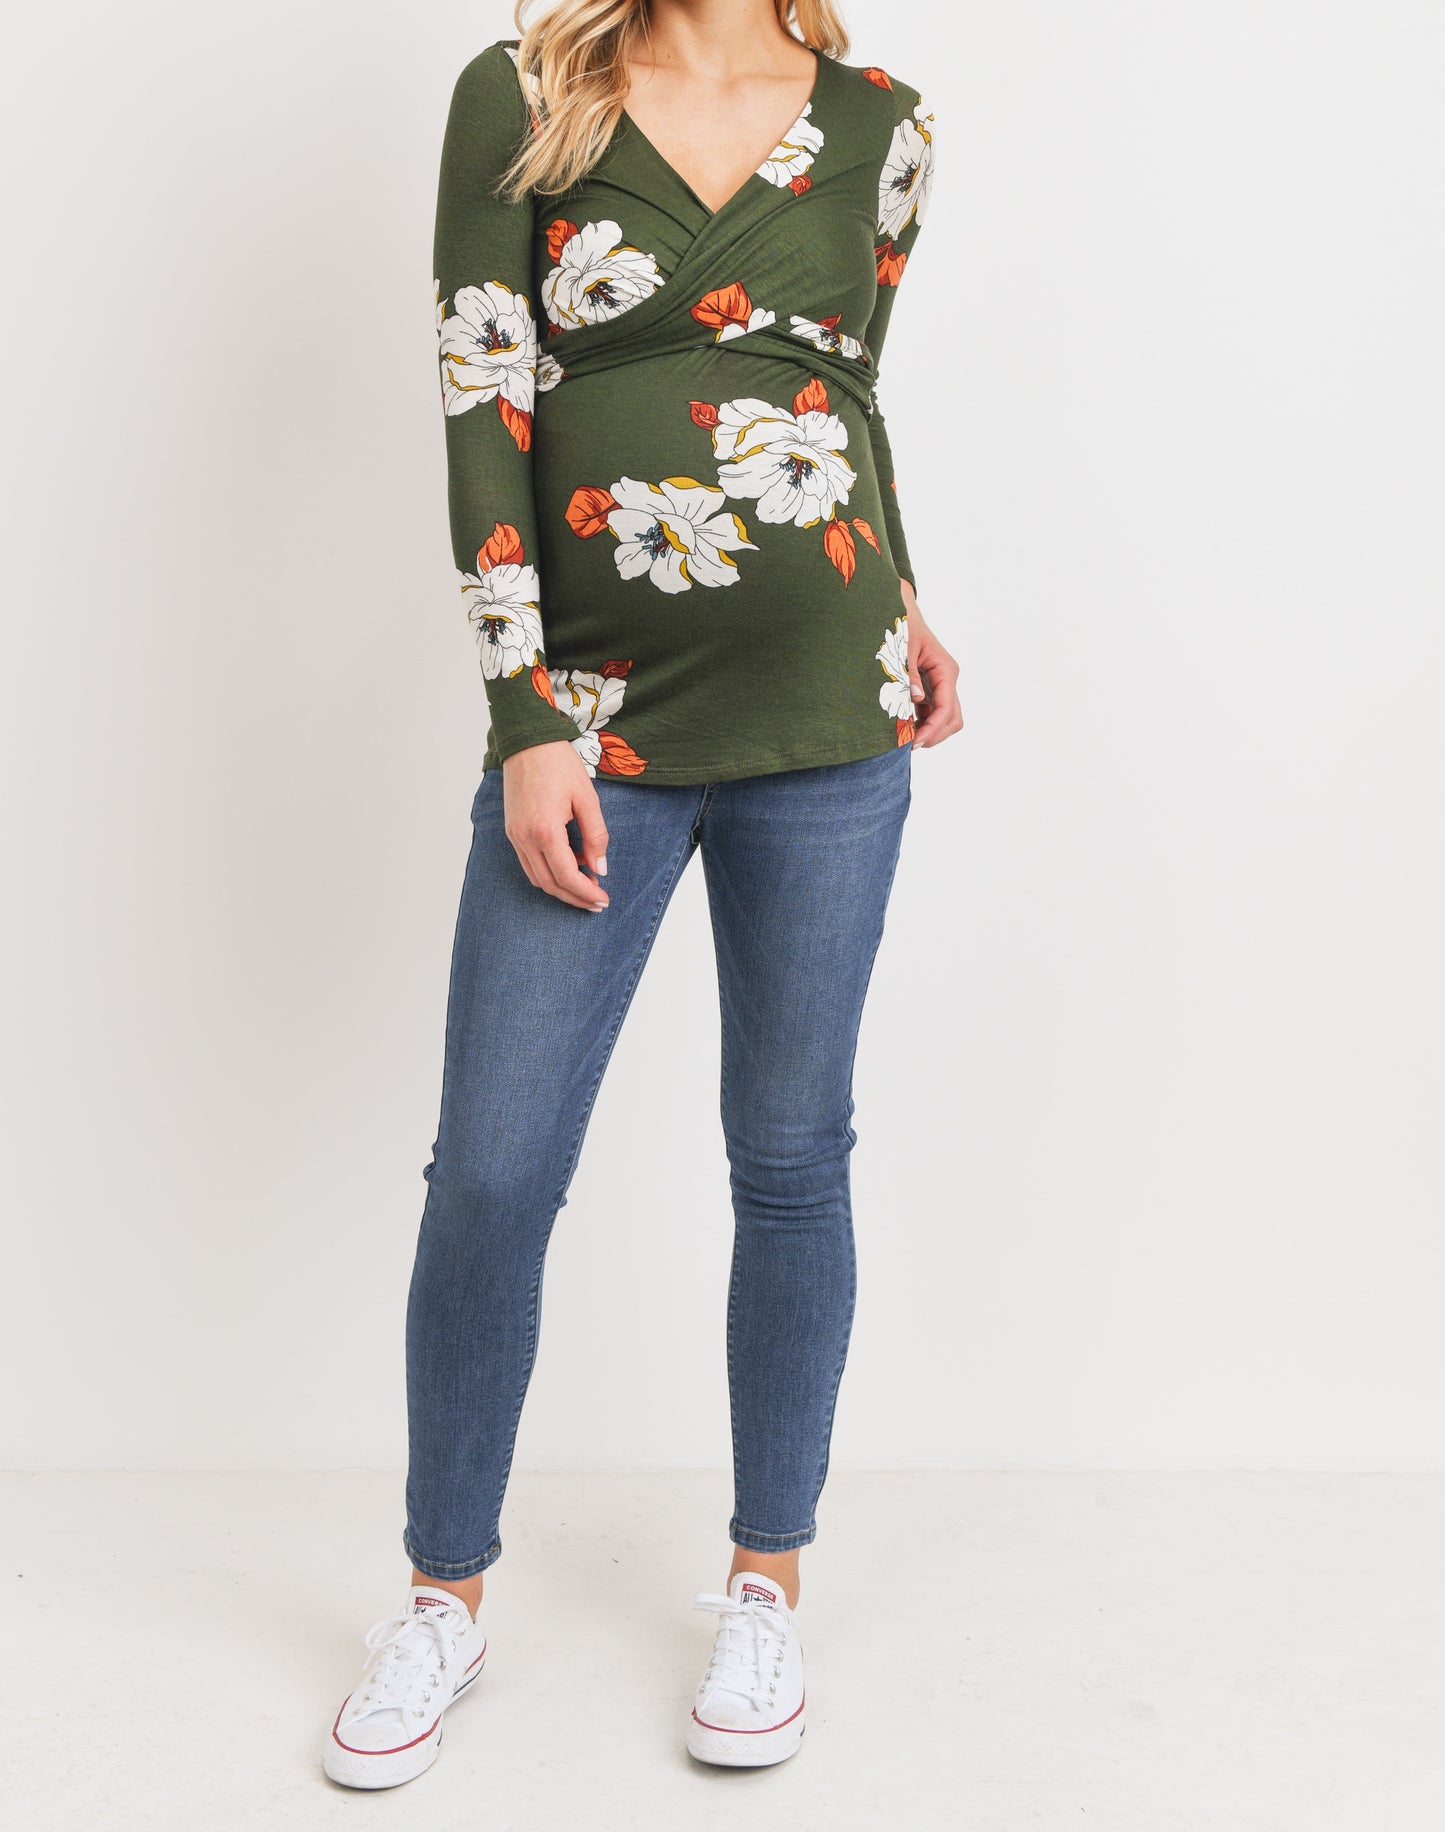 Green Floral maternity wrap top